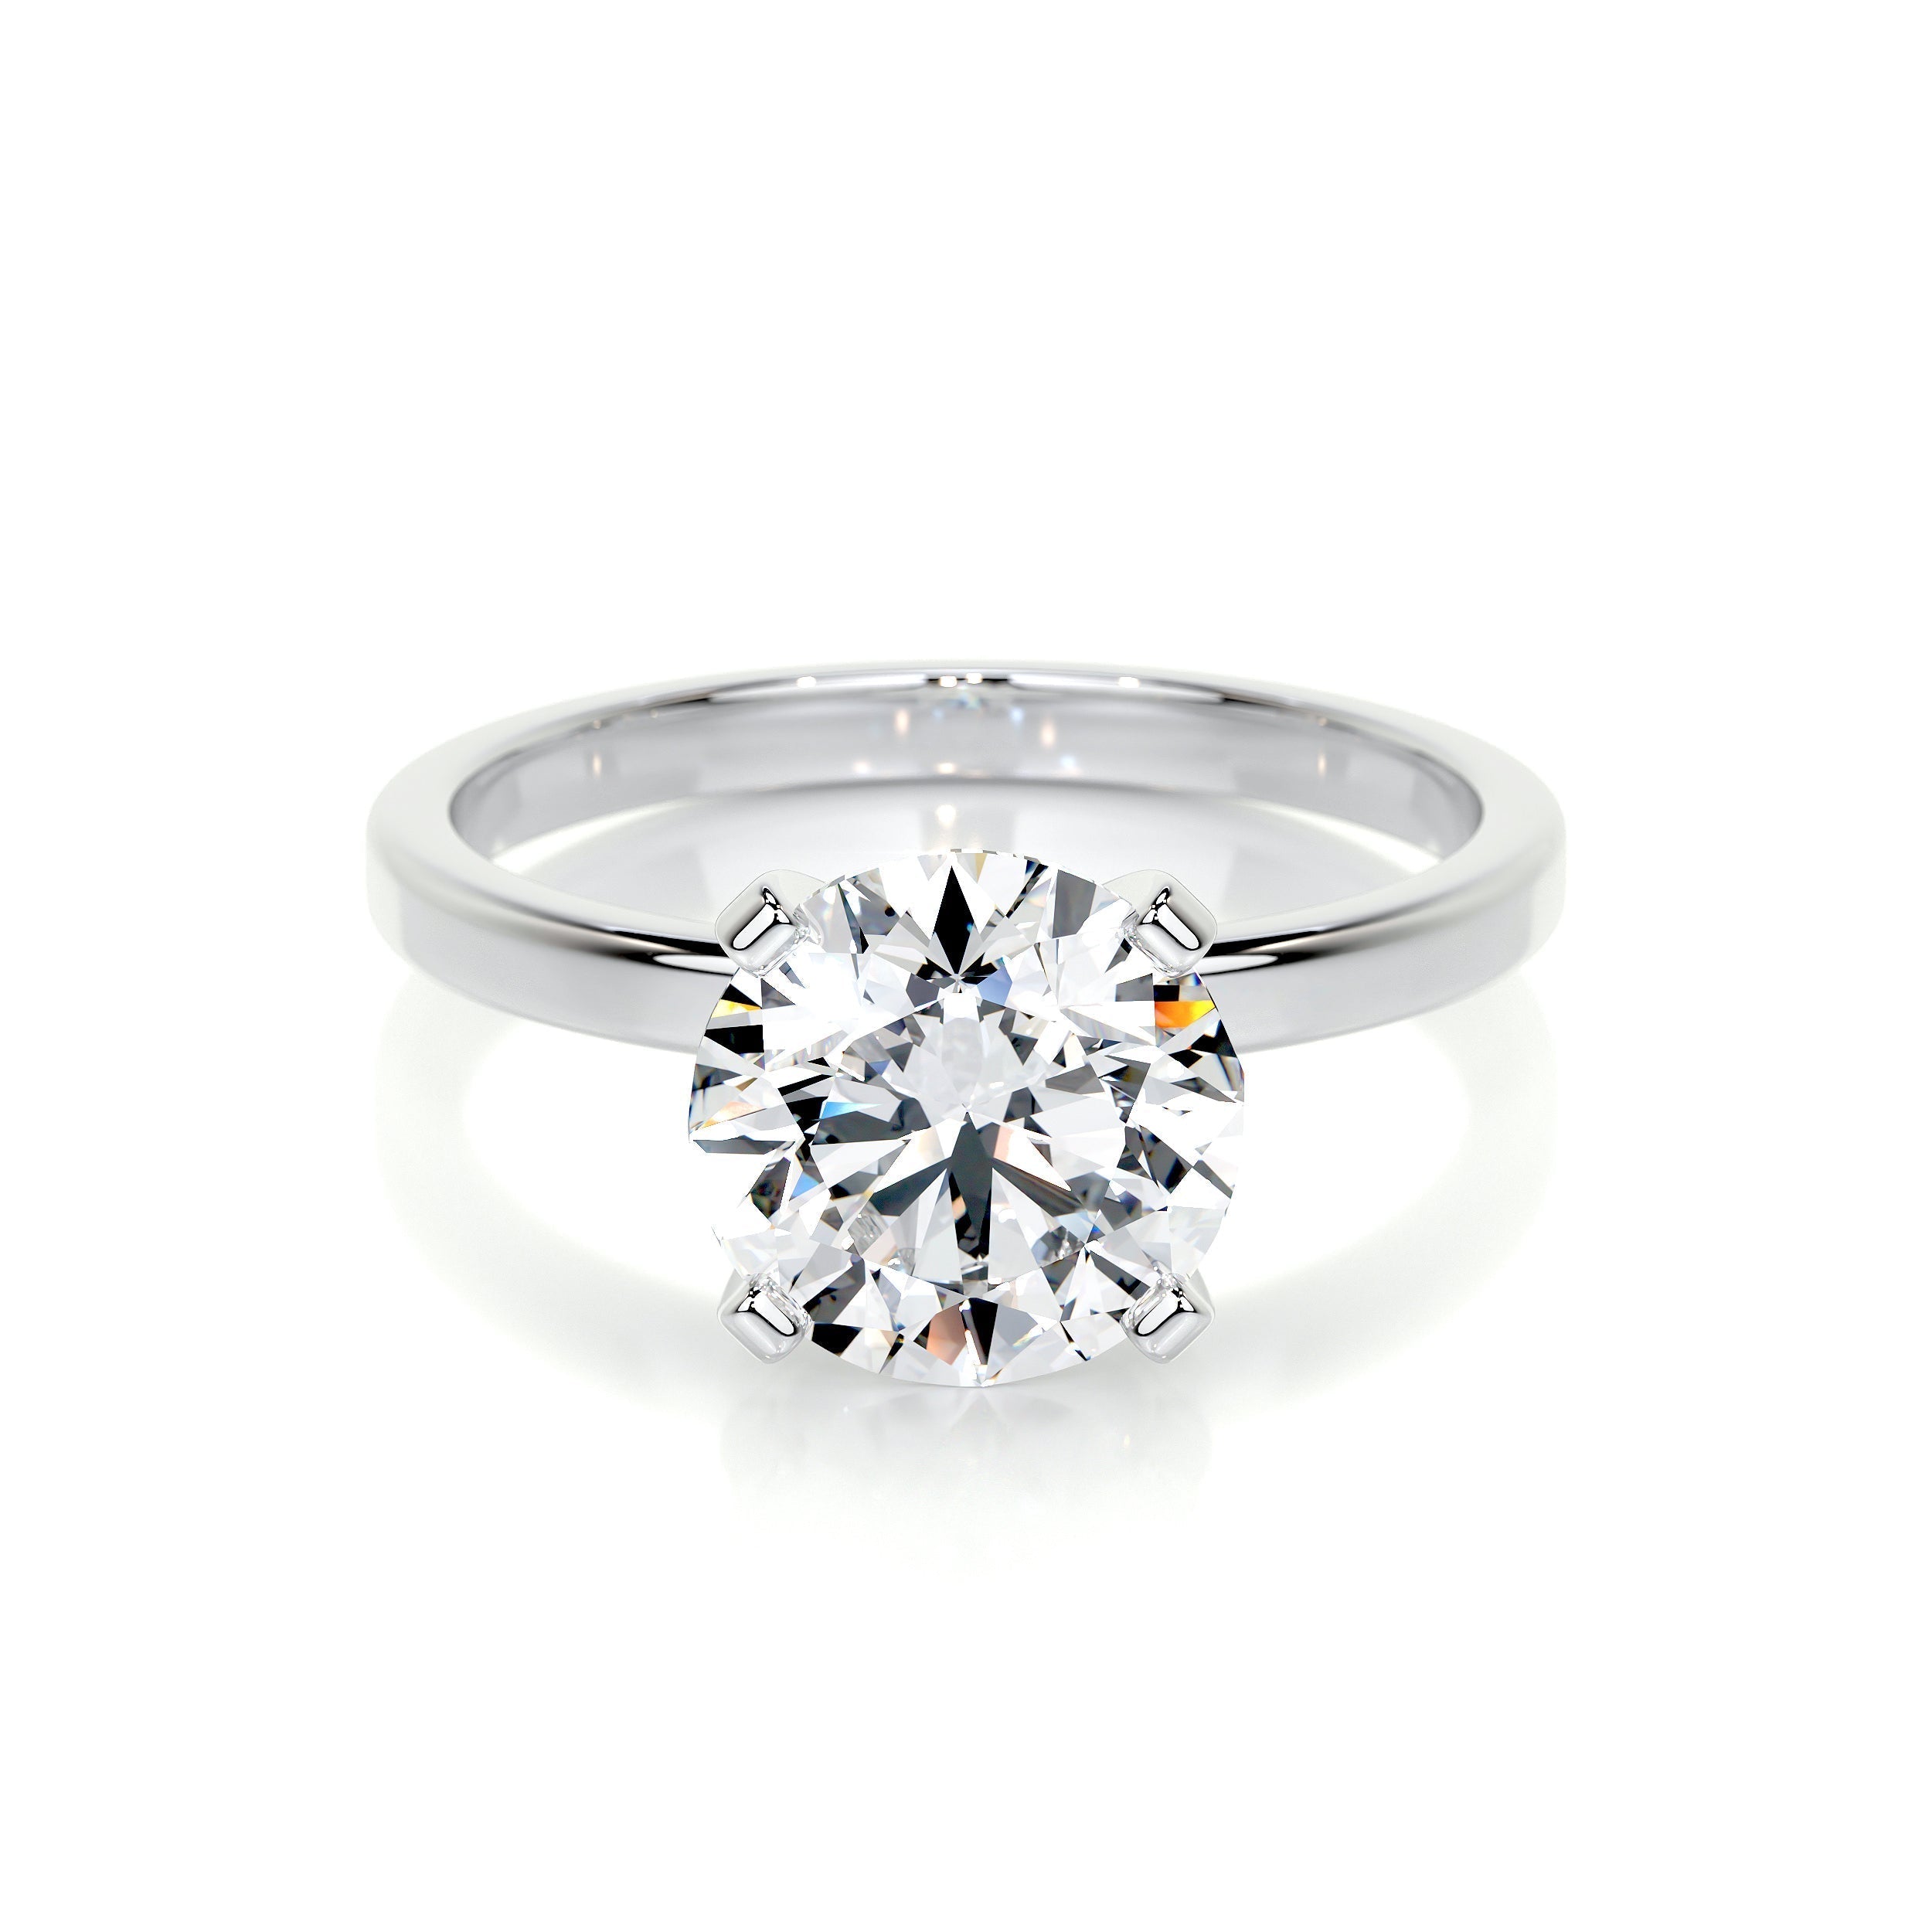 2.0 CT Round Solitaire CVD E/VS2 Diamond Engagement Ring 44